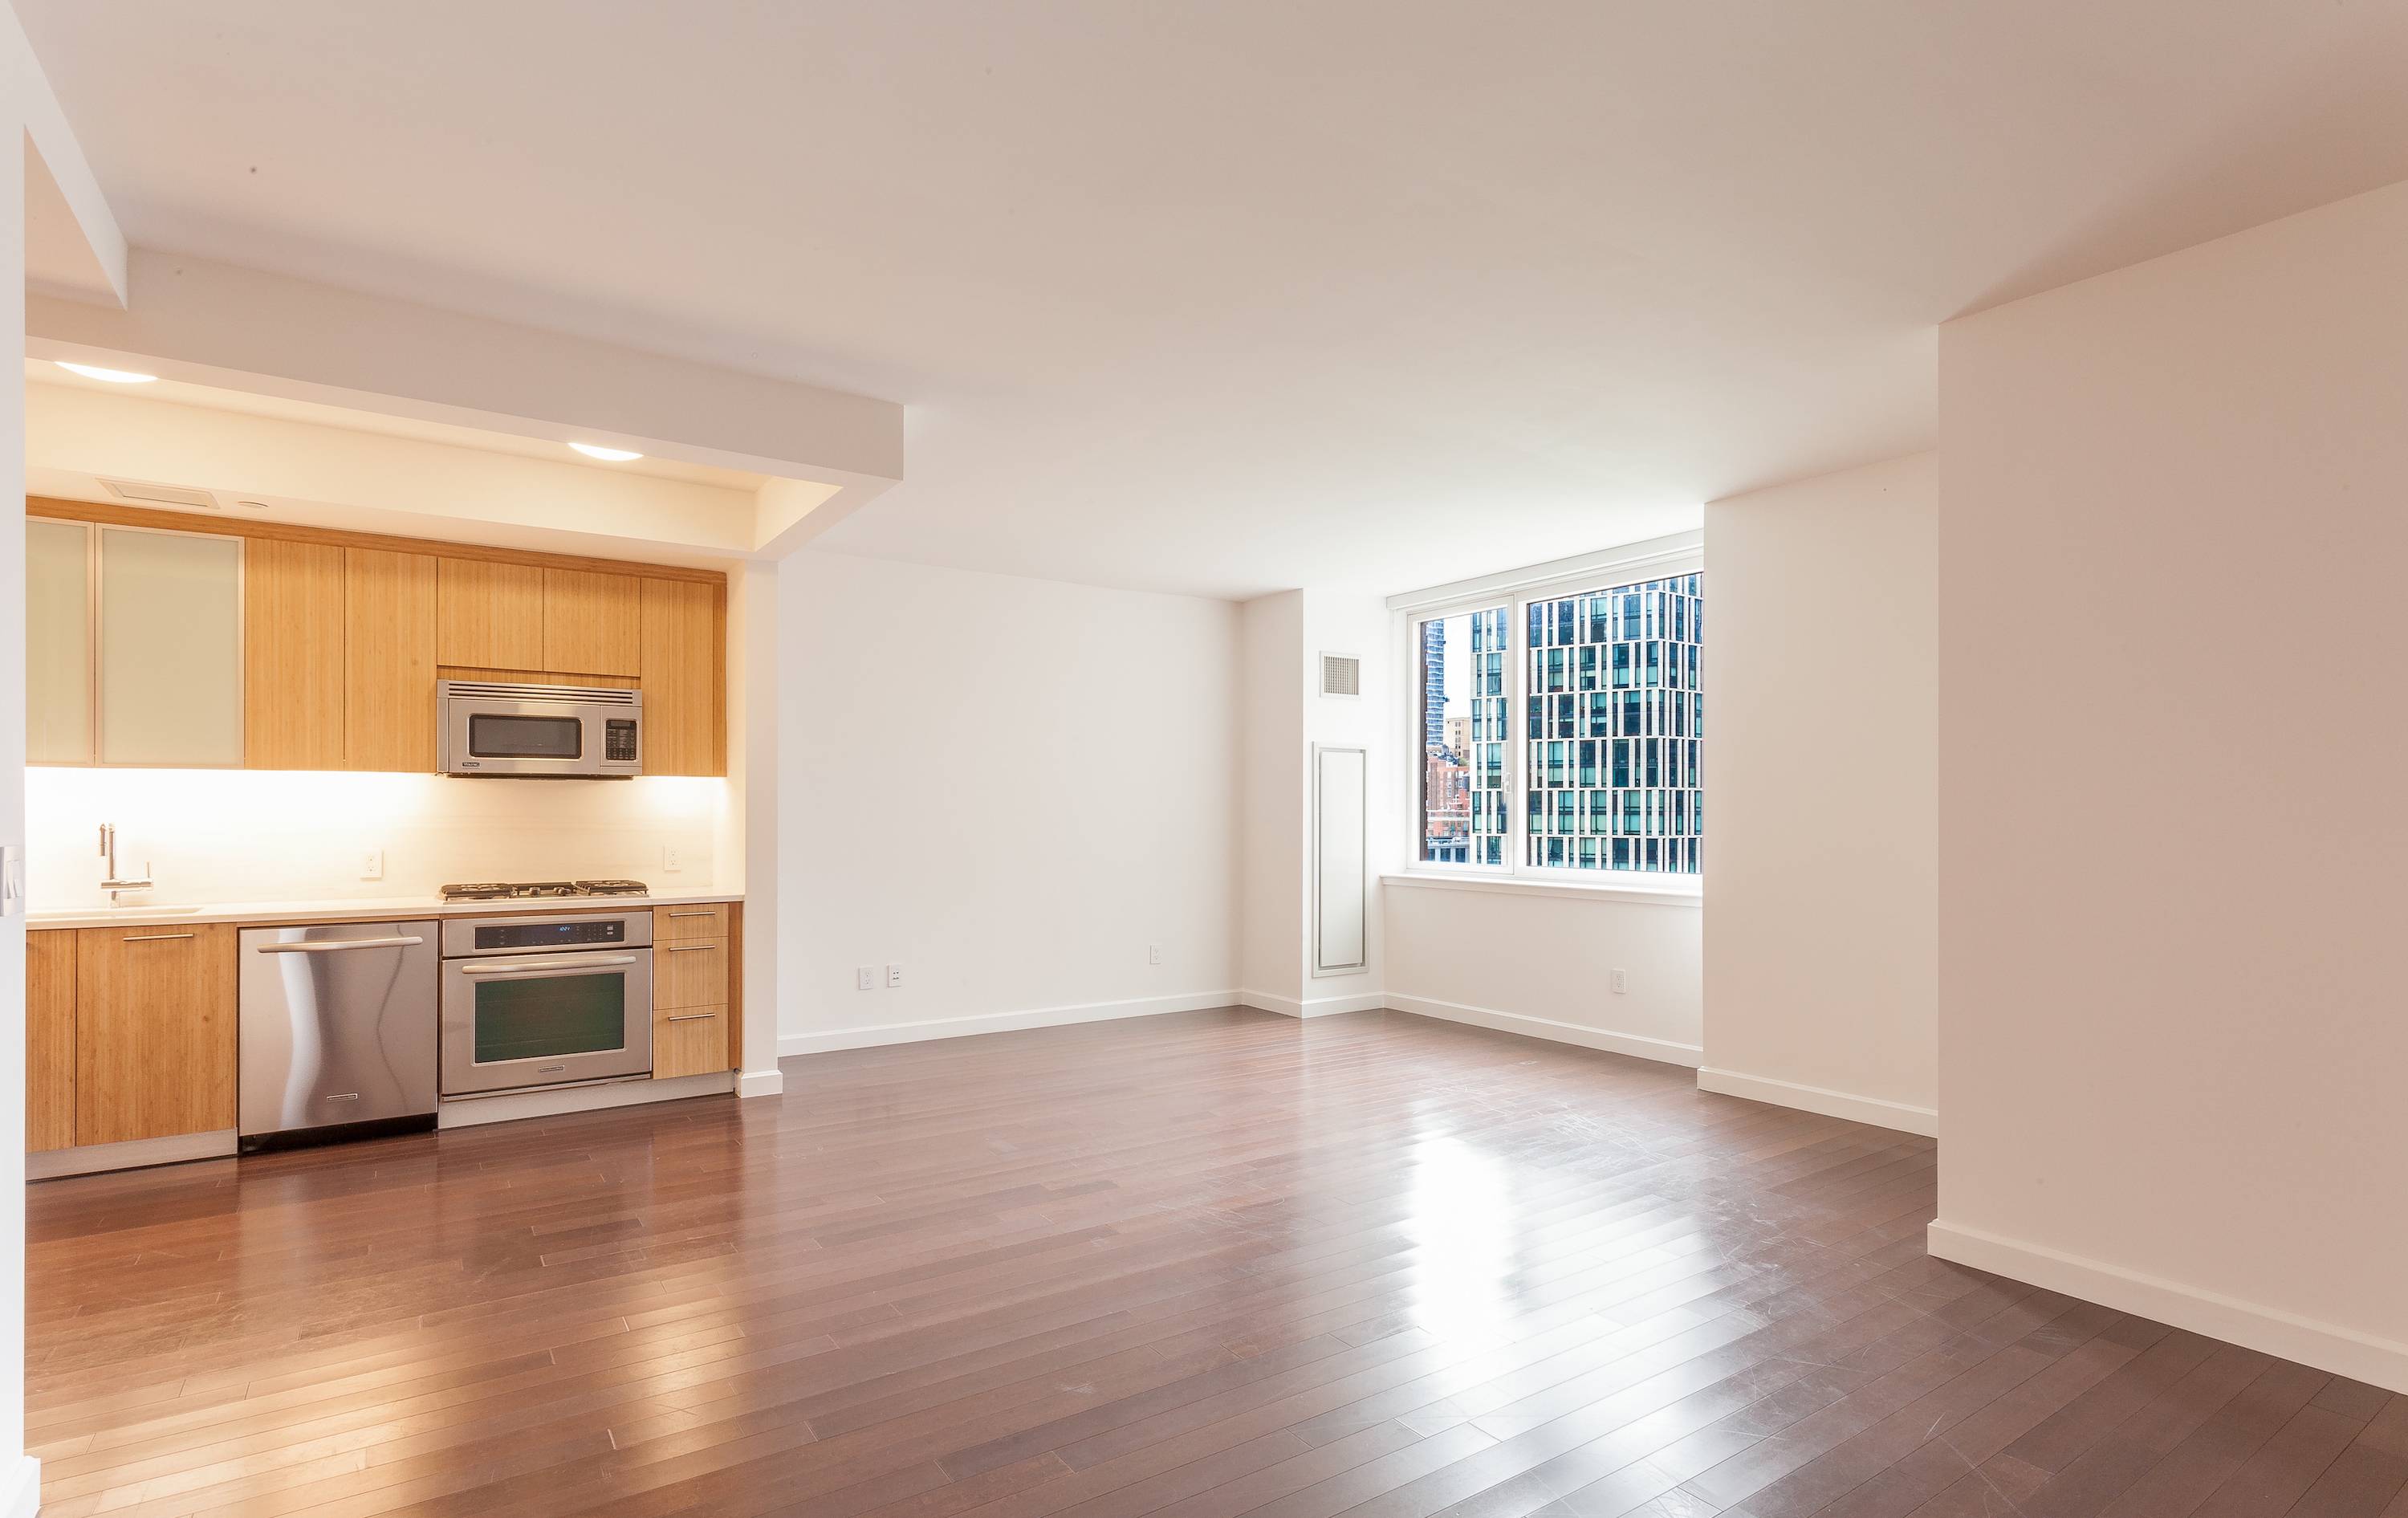 Battery Park, Studio, $4,000 NO FEE, Hardwood Floors and Lots of Closet Space!